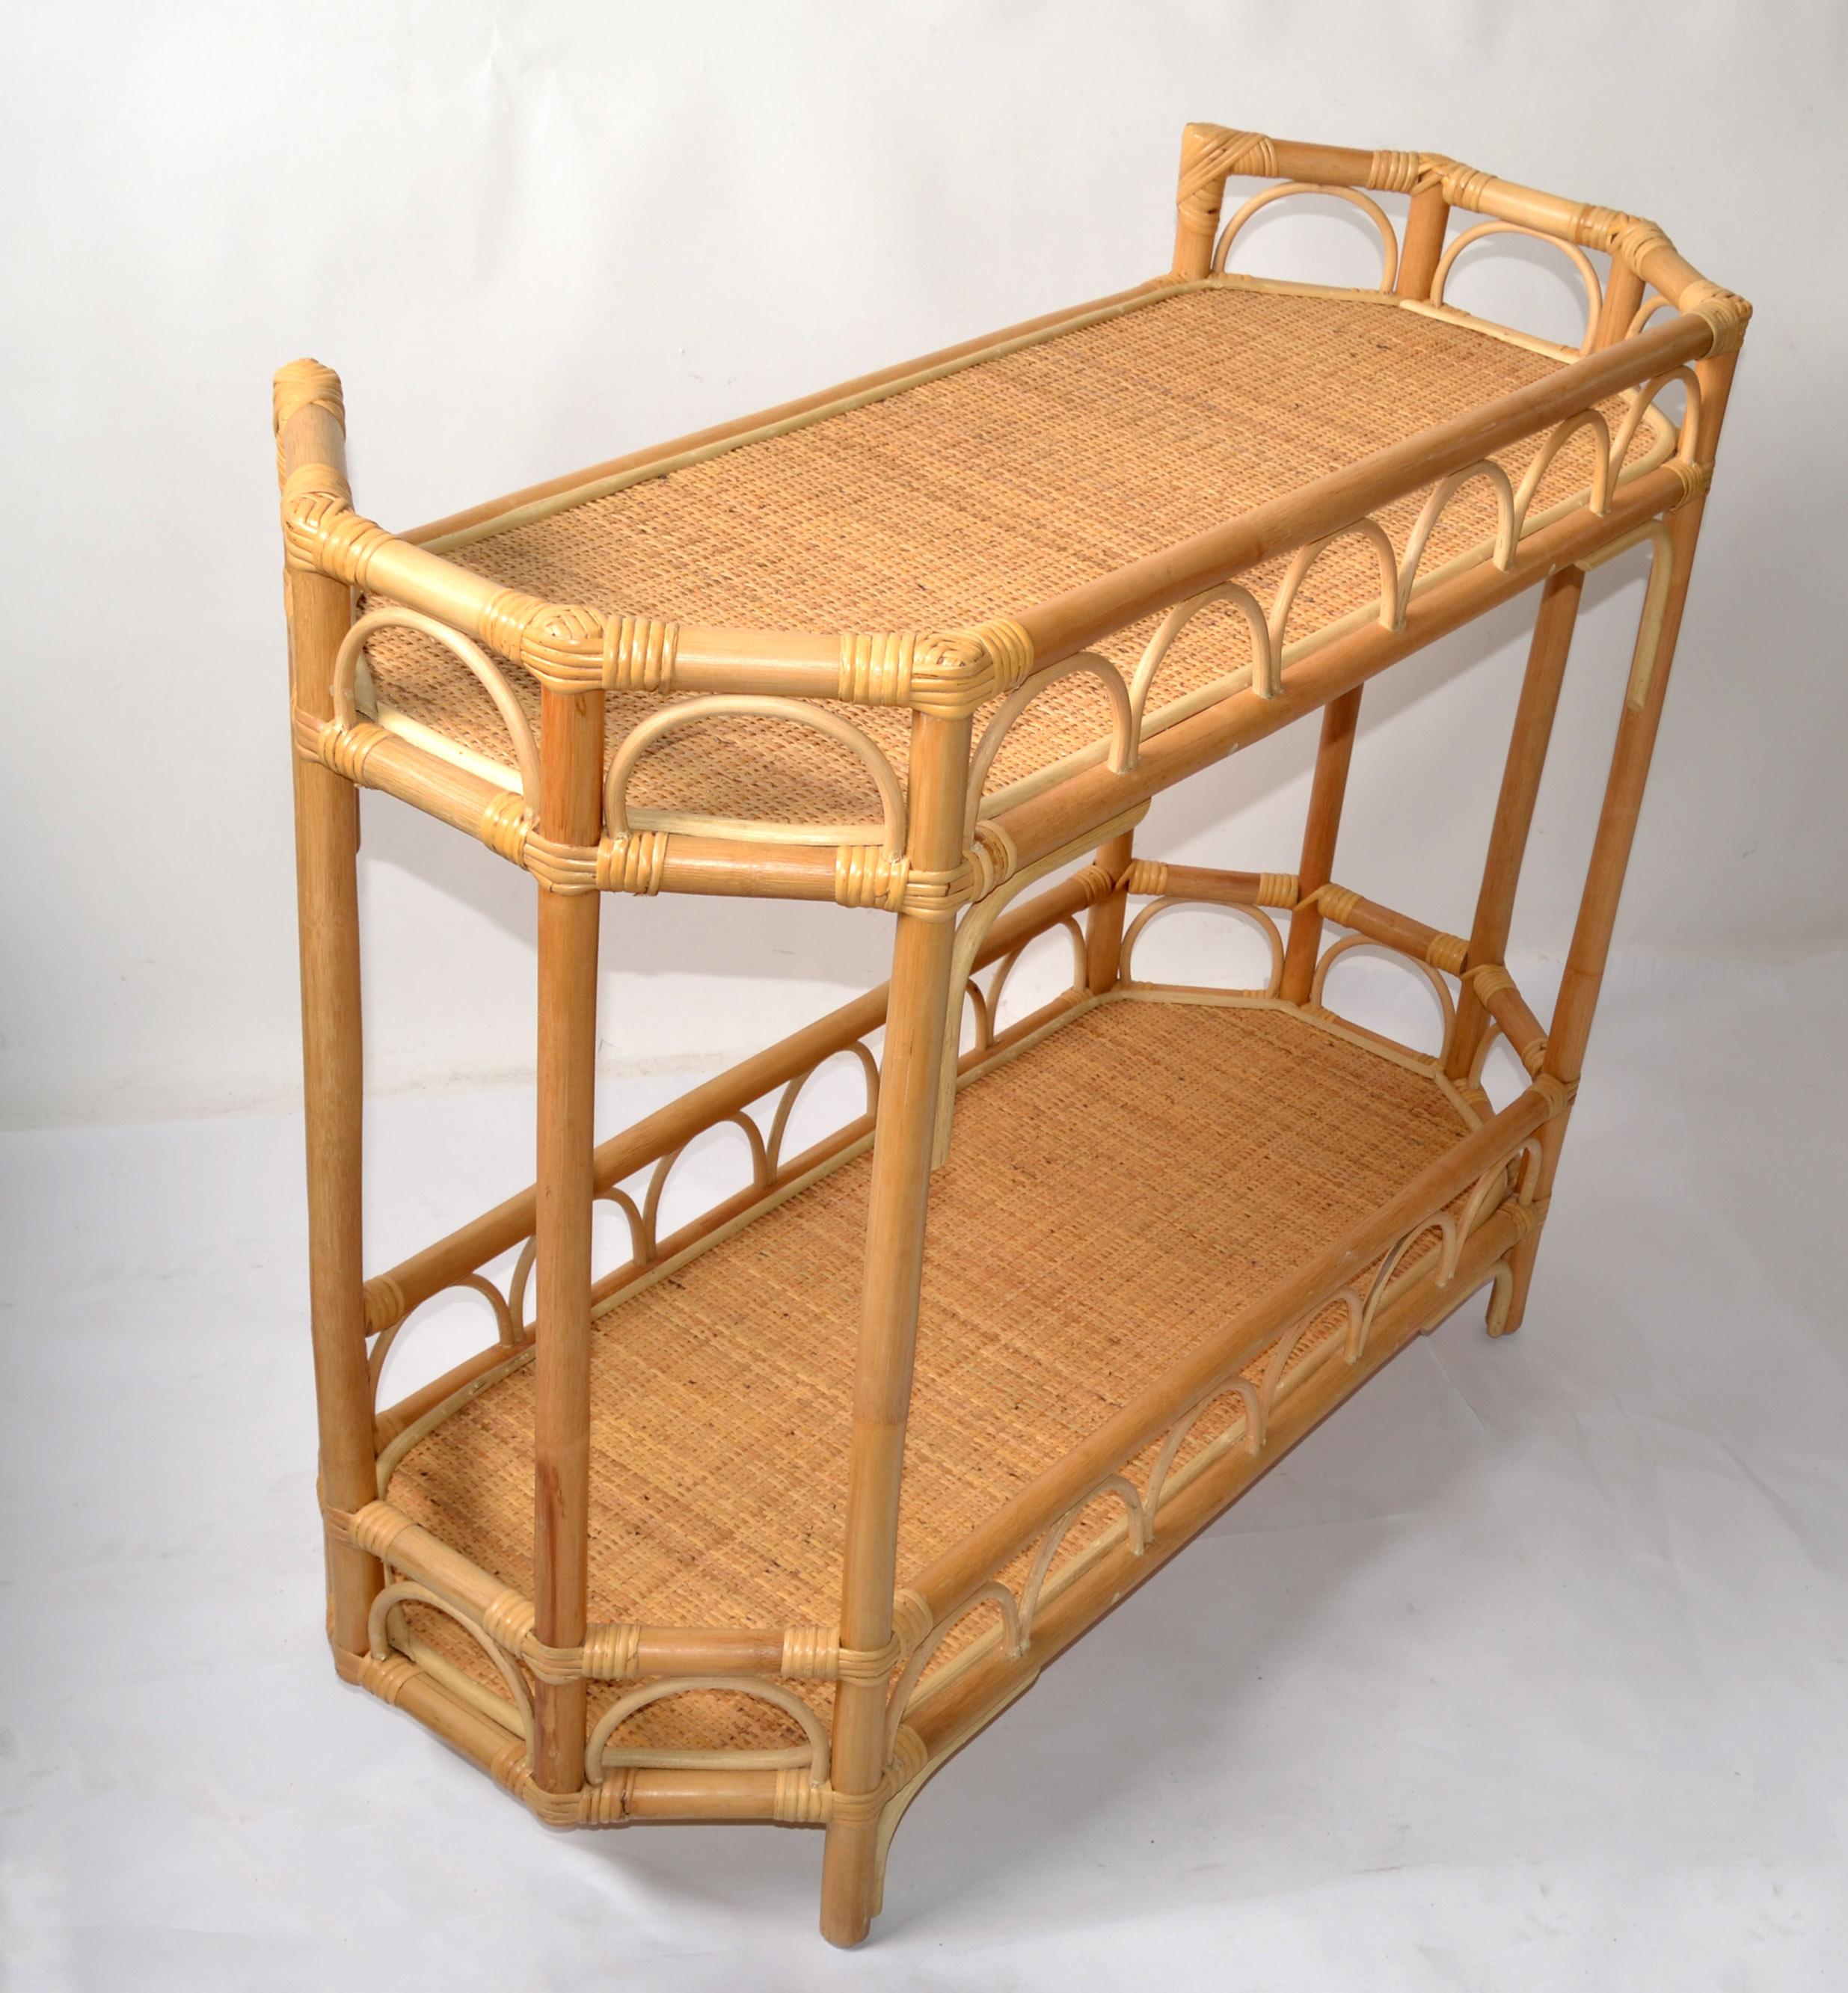 Boho Chic 2 Tier Bent Bamboo & Cane handwoven Top Kitchen Dry Bar Console Table In Good Condition For Sale In Miami, FL